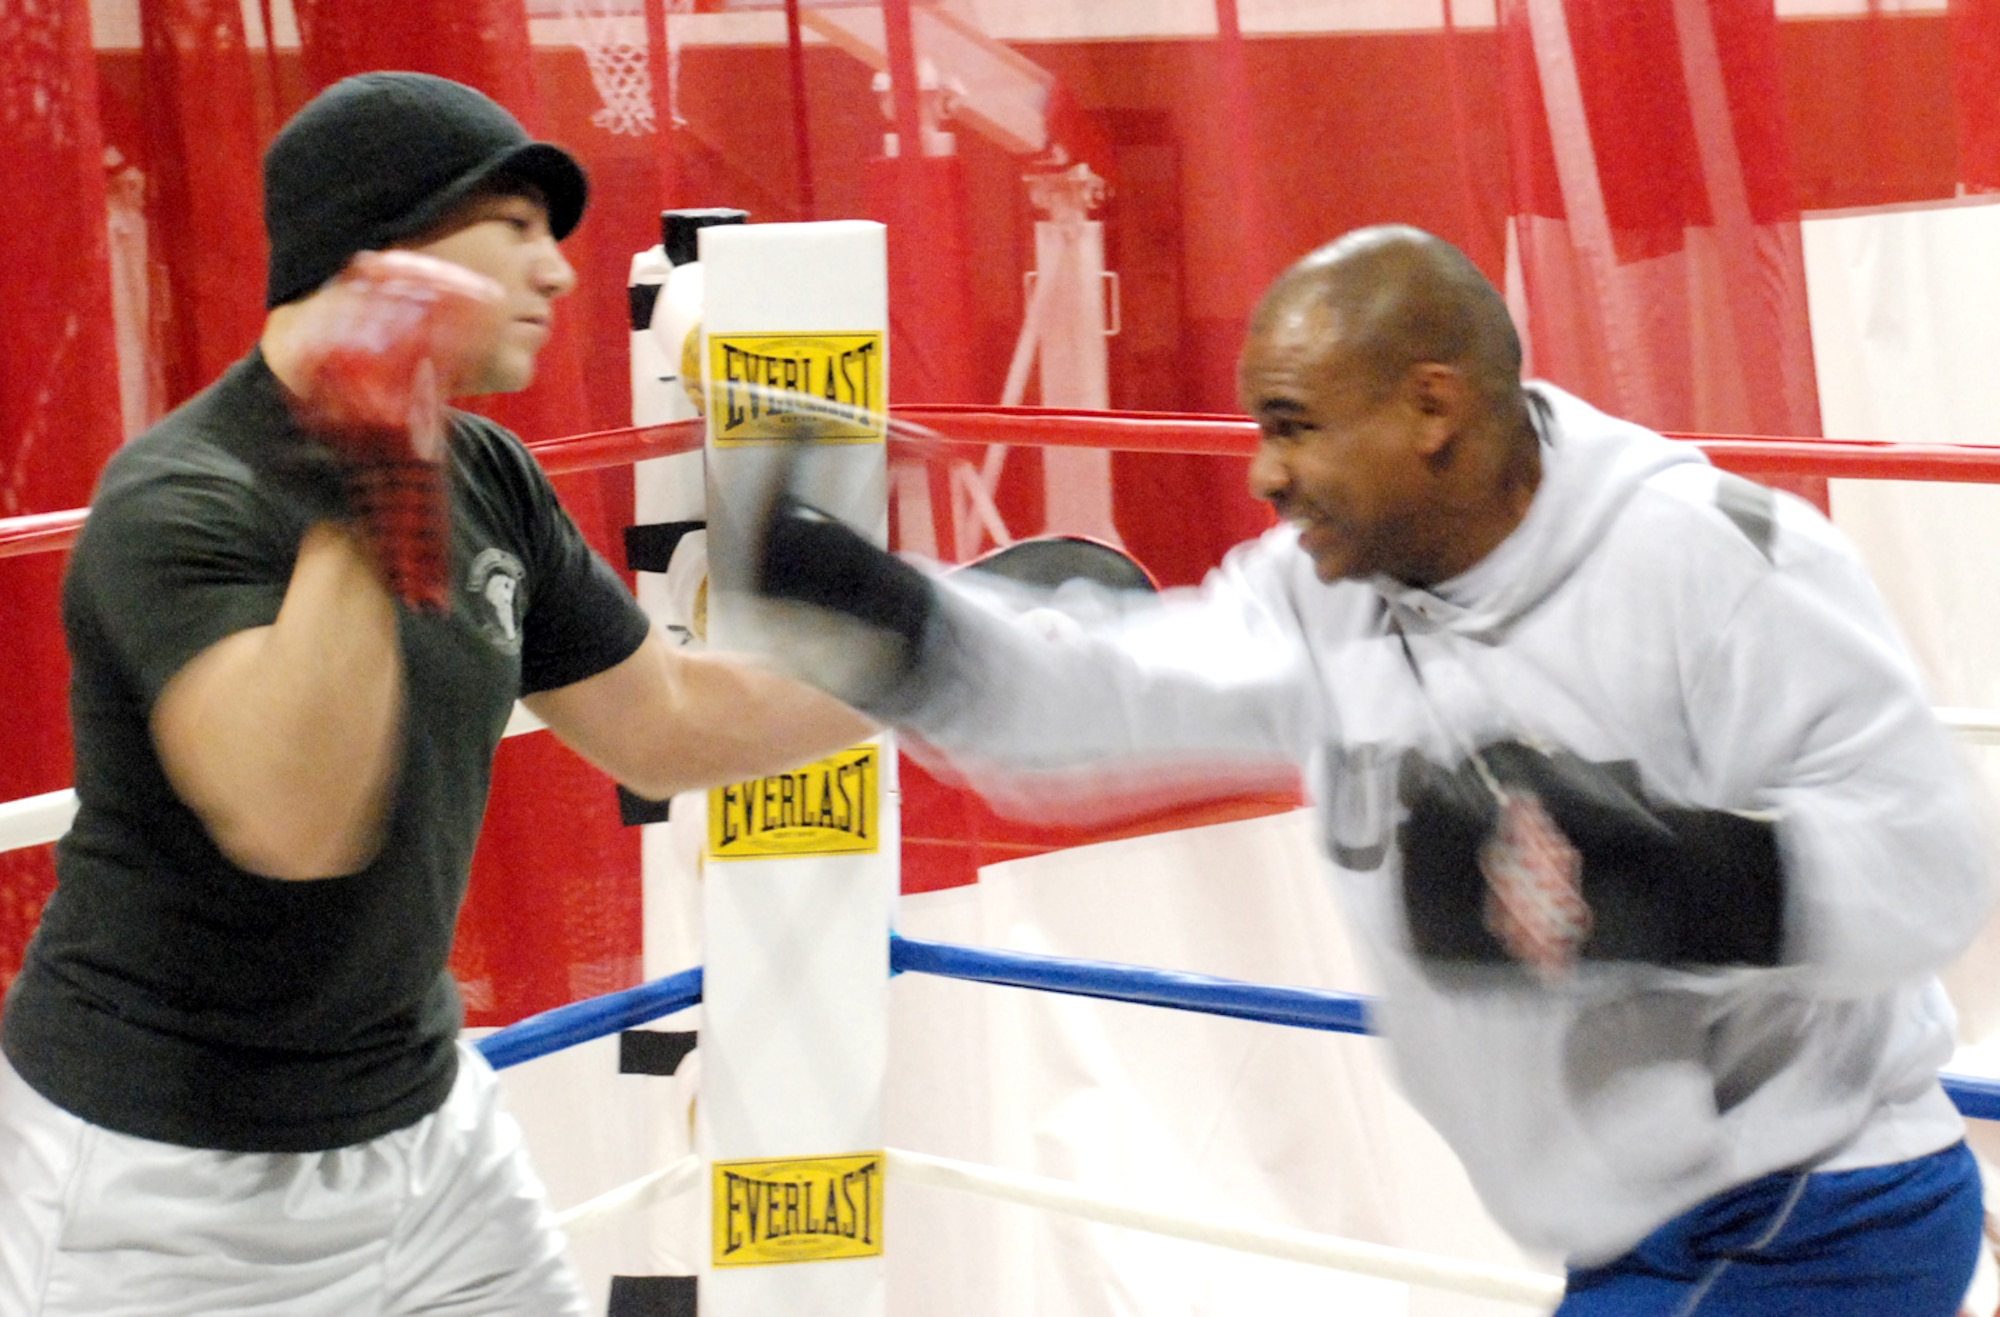 Capt. David Suszko, 319th Missile Squadron, works the mitts with Capt. Rodney Ellison, 319th MS, Jan. 29 at the Fall Hall Community Center. Captain Ellison has been the Air Force light heavyweight boxing champion and second in the Defense Department for the past three years (U.S. Air Force photo/Staff Sgt. Chad Thompson).